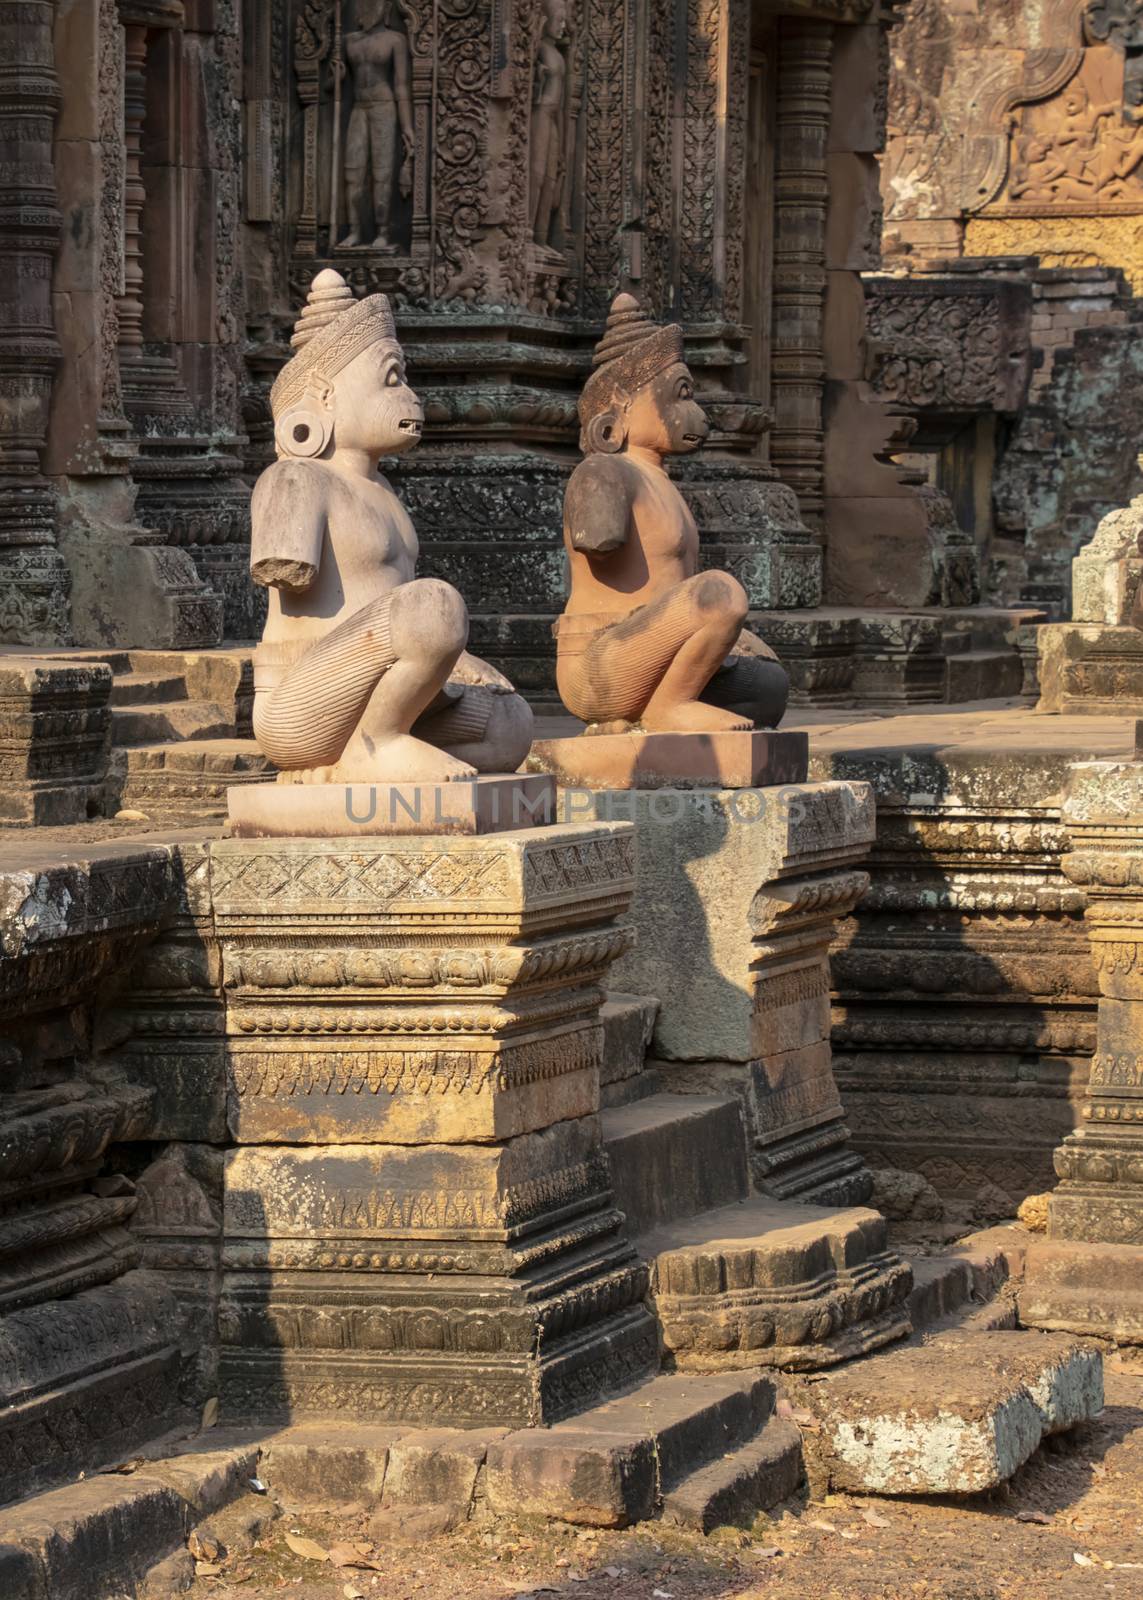 Cambodia, Banteay Seay - March 2016 - Reconstructed ruins of ornately carved 10th-century, red sand stone, temple dedicated to the Hindu god Shiva, bathed in the early morning light